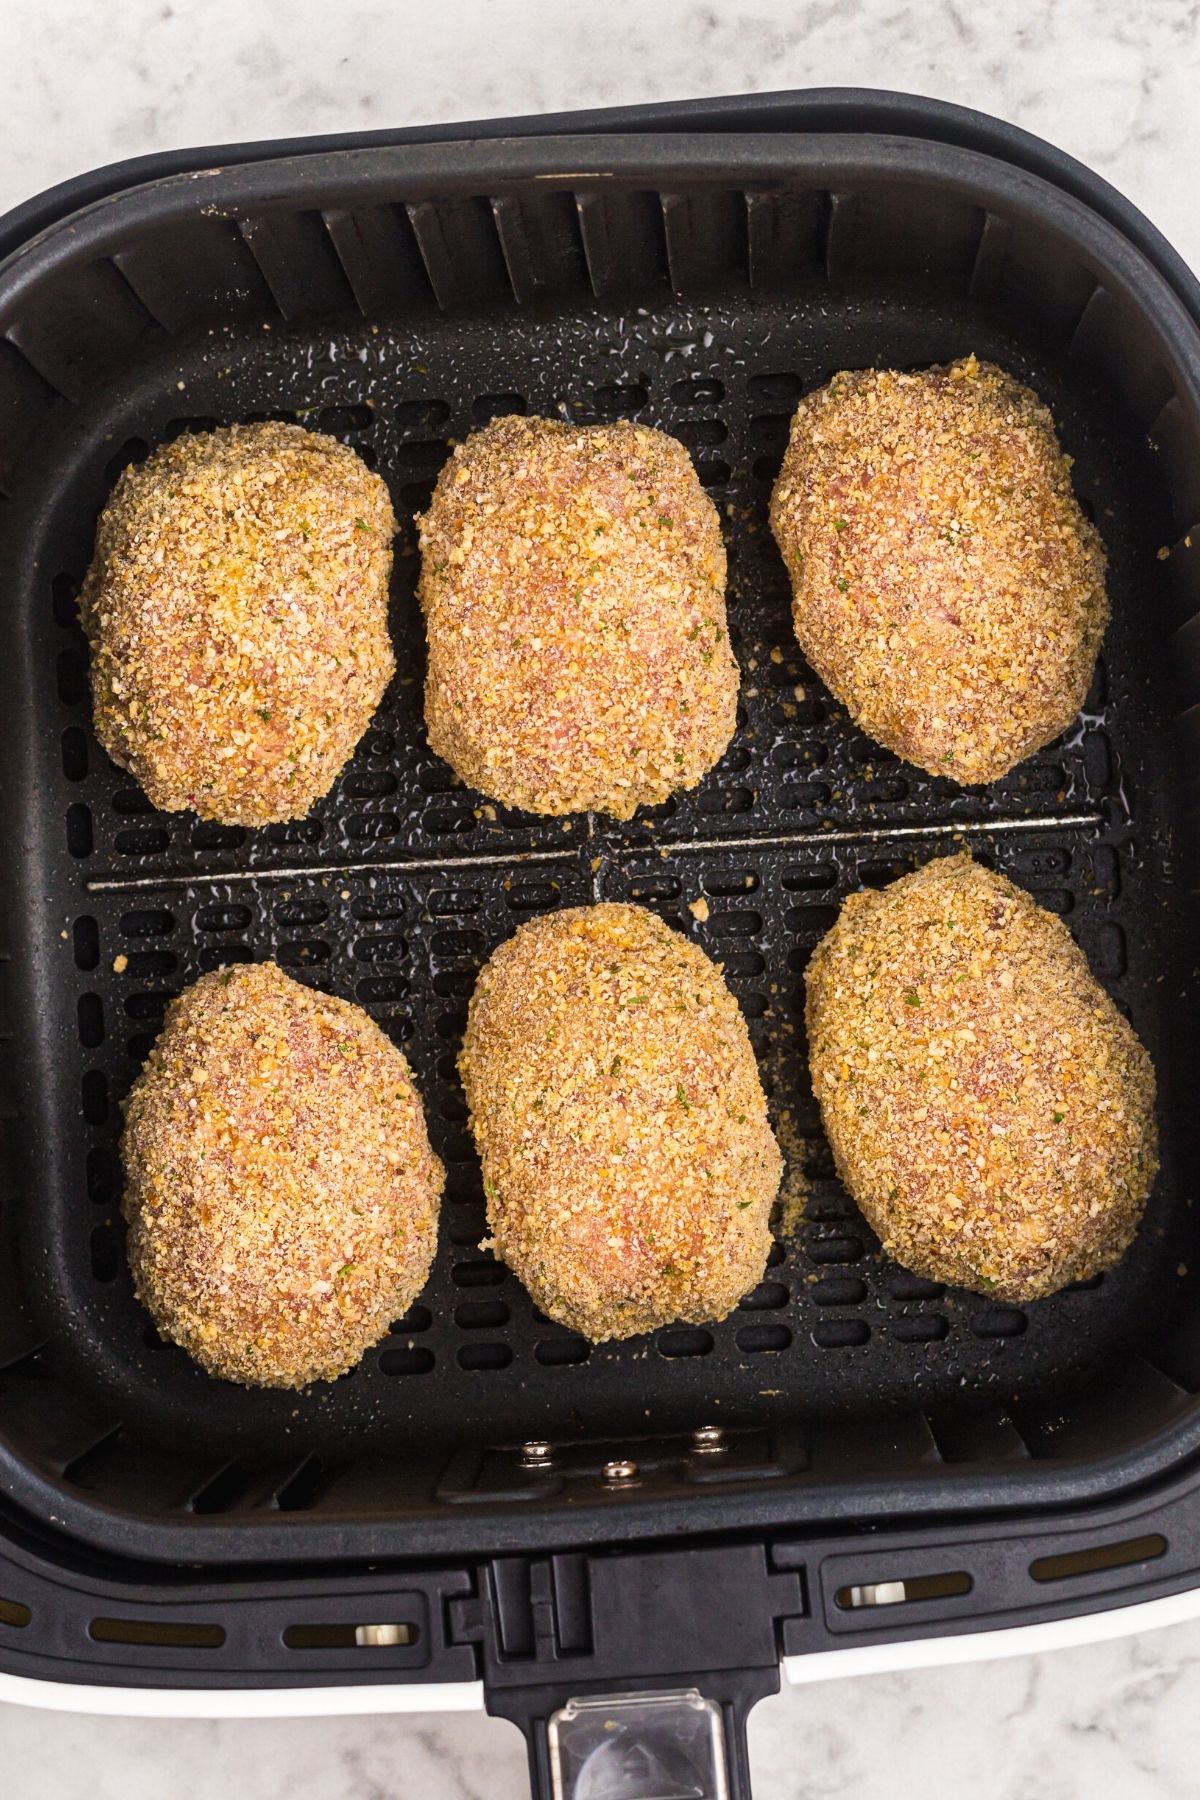 Bread coated eggs in the air fryer basket before being cooked